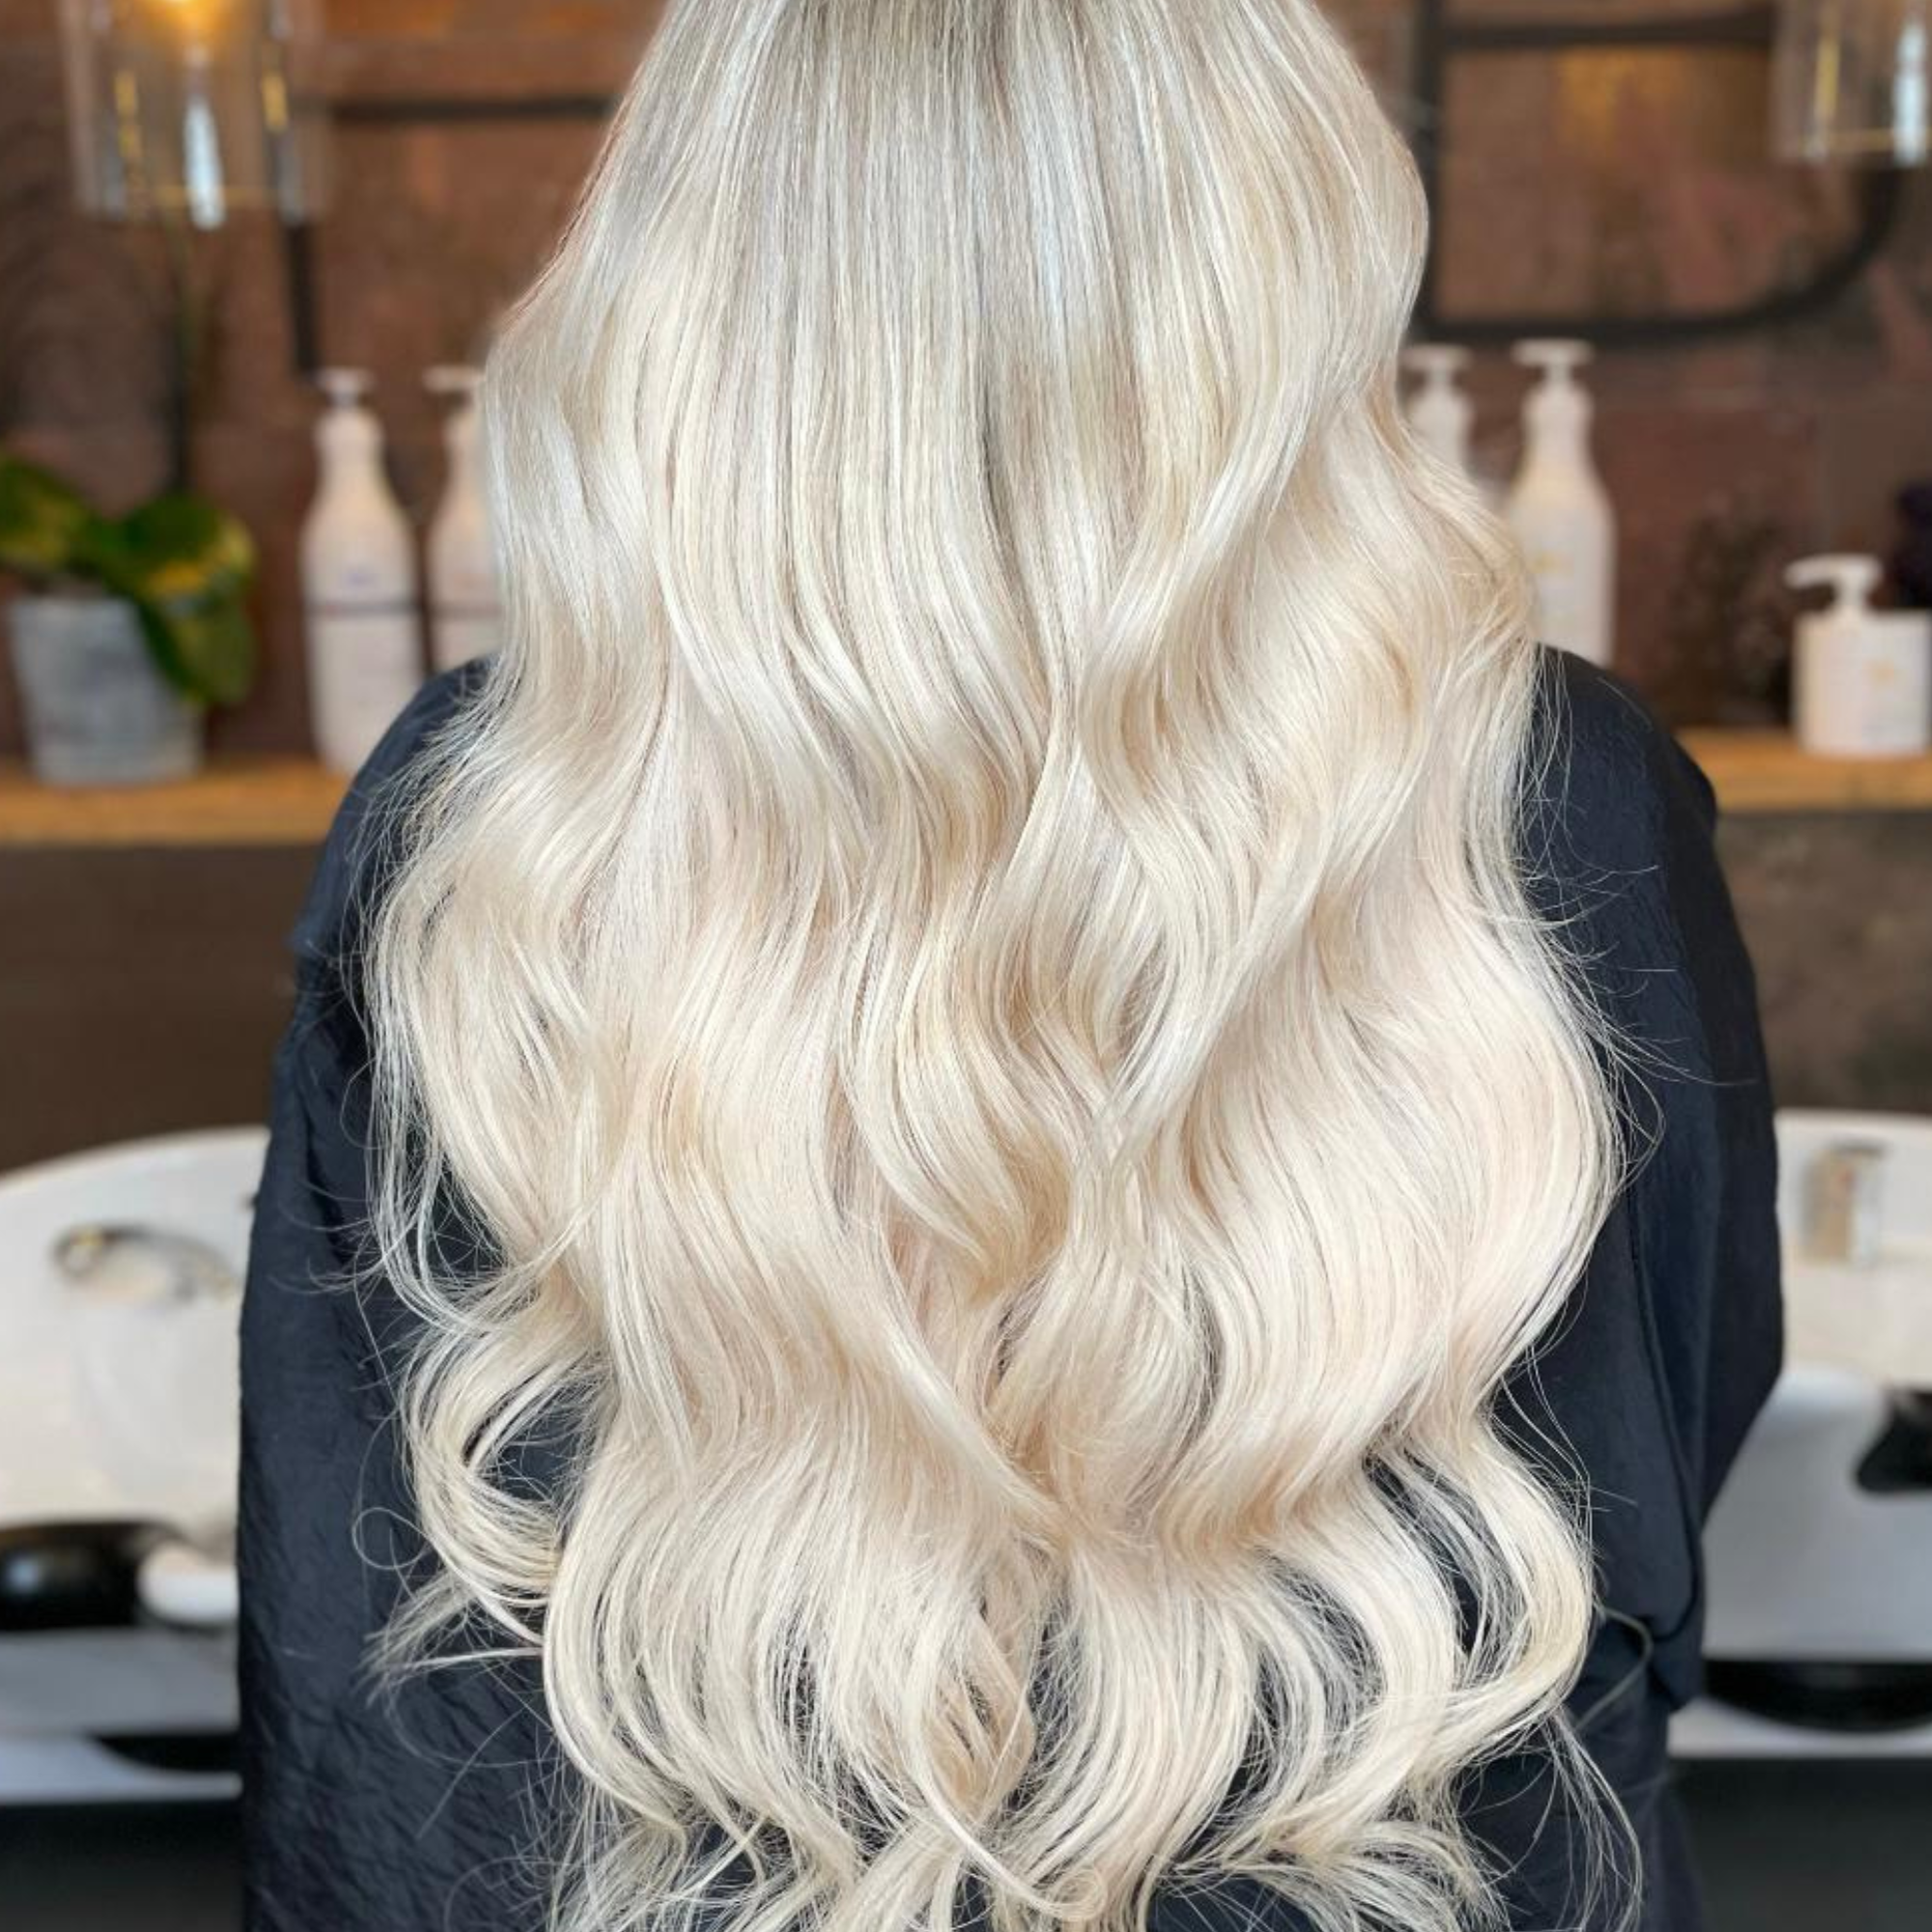 22" Invisible Tape Extensions Ice Blonde